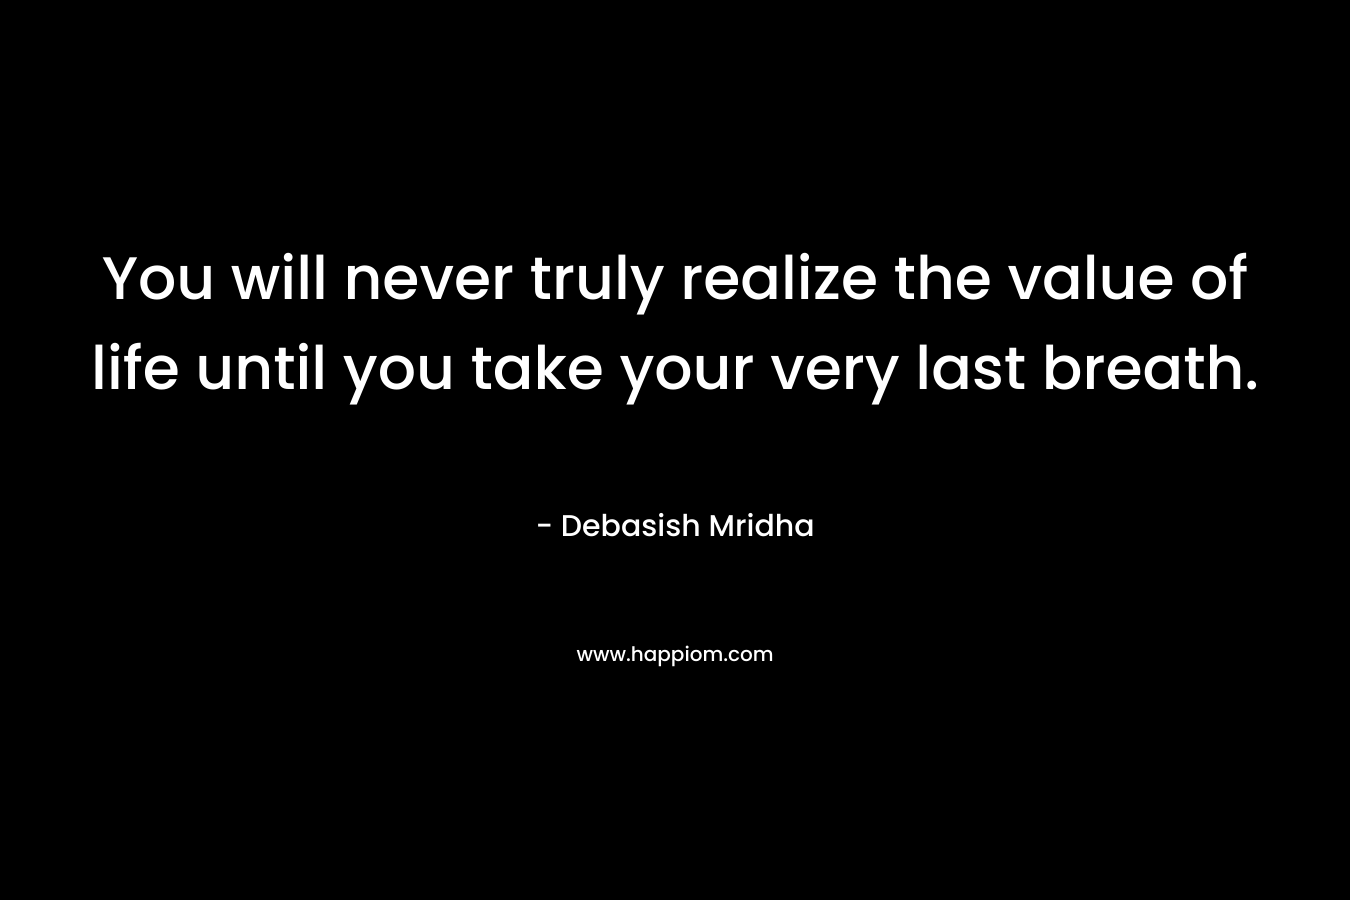 You will never truly realize the value of life until you take your very last breath.